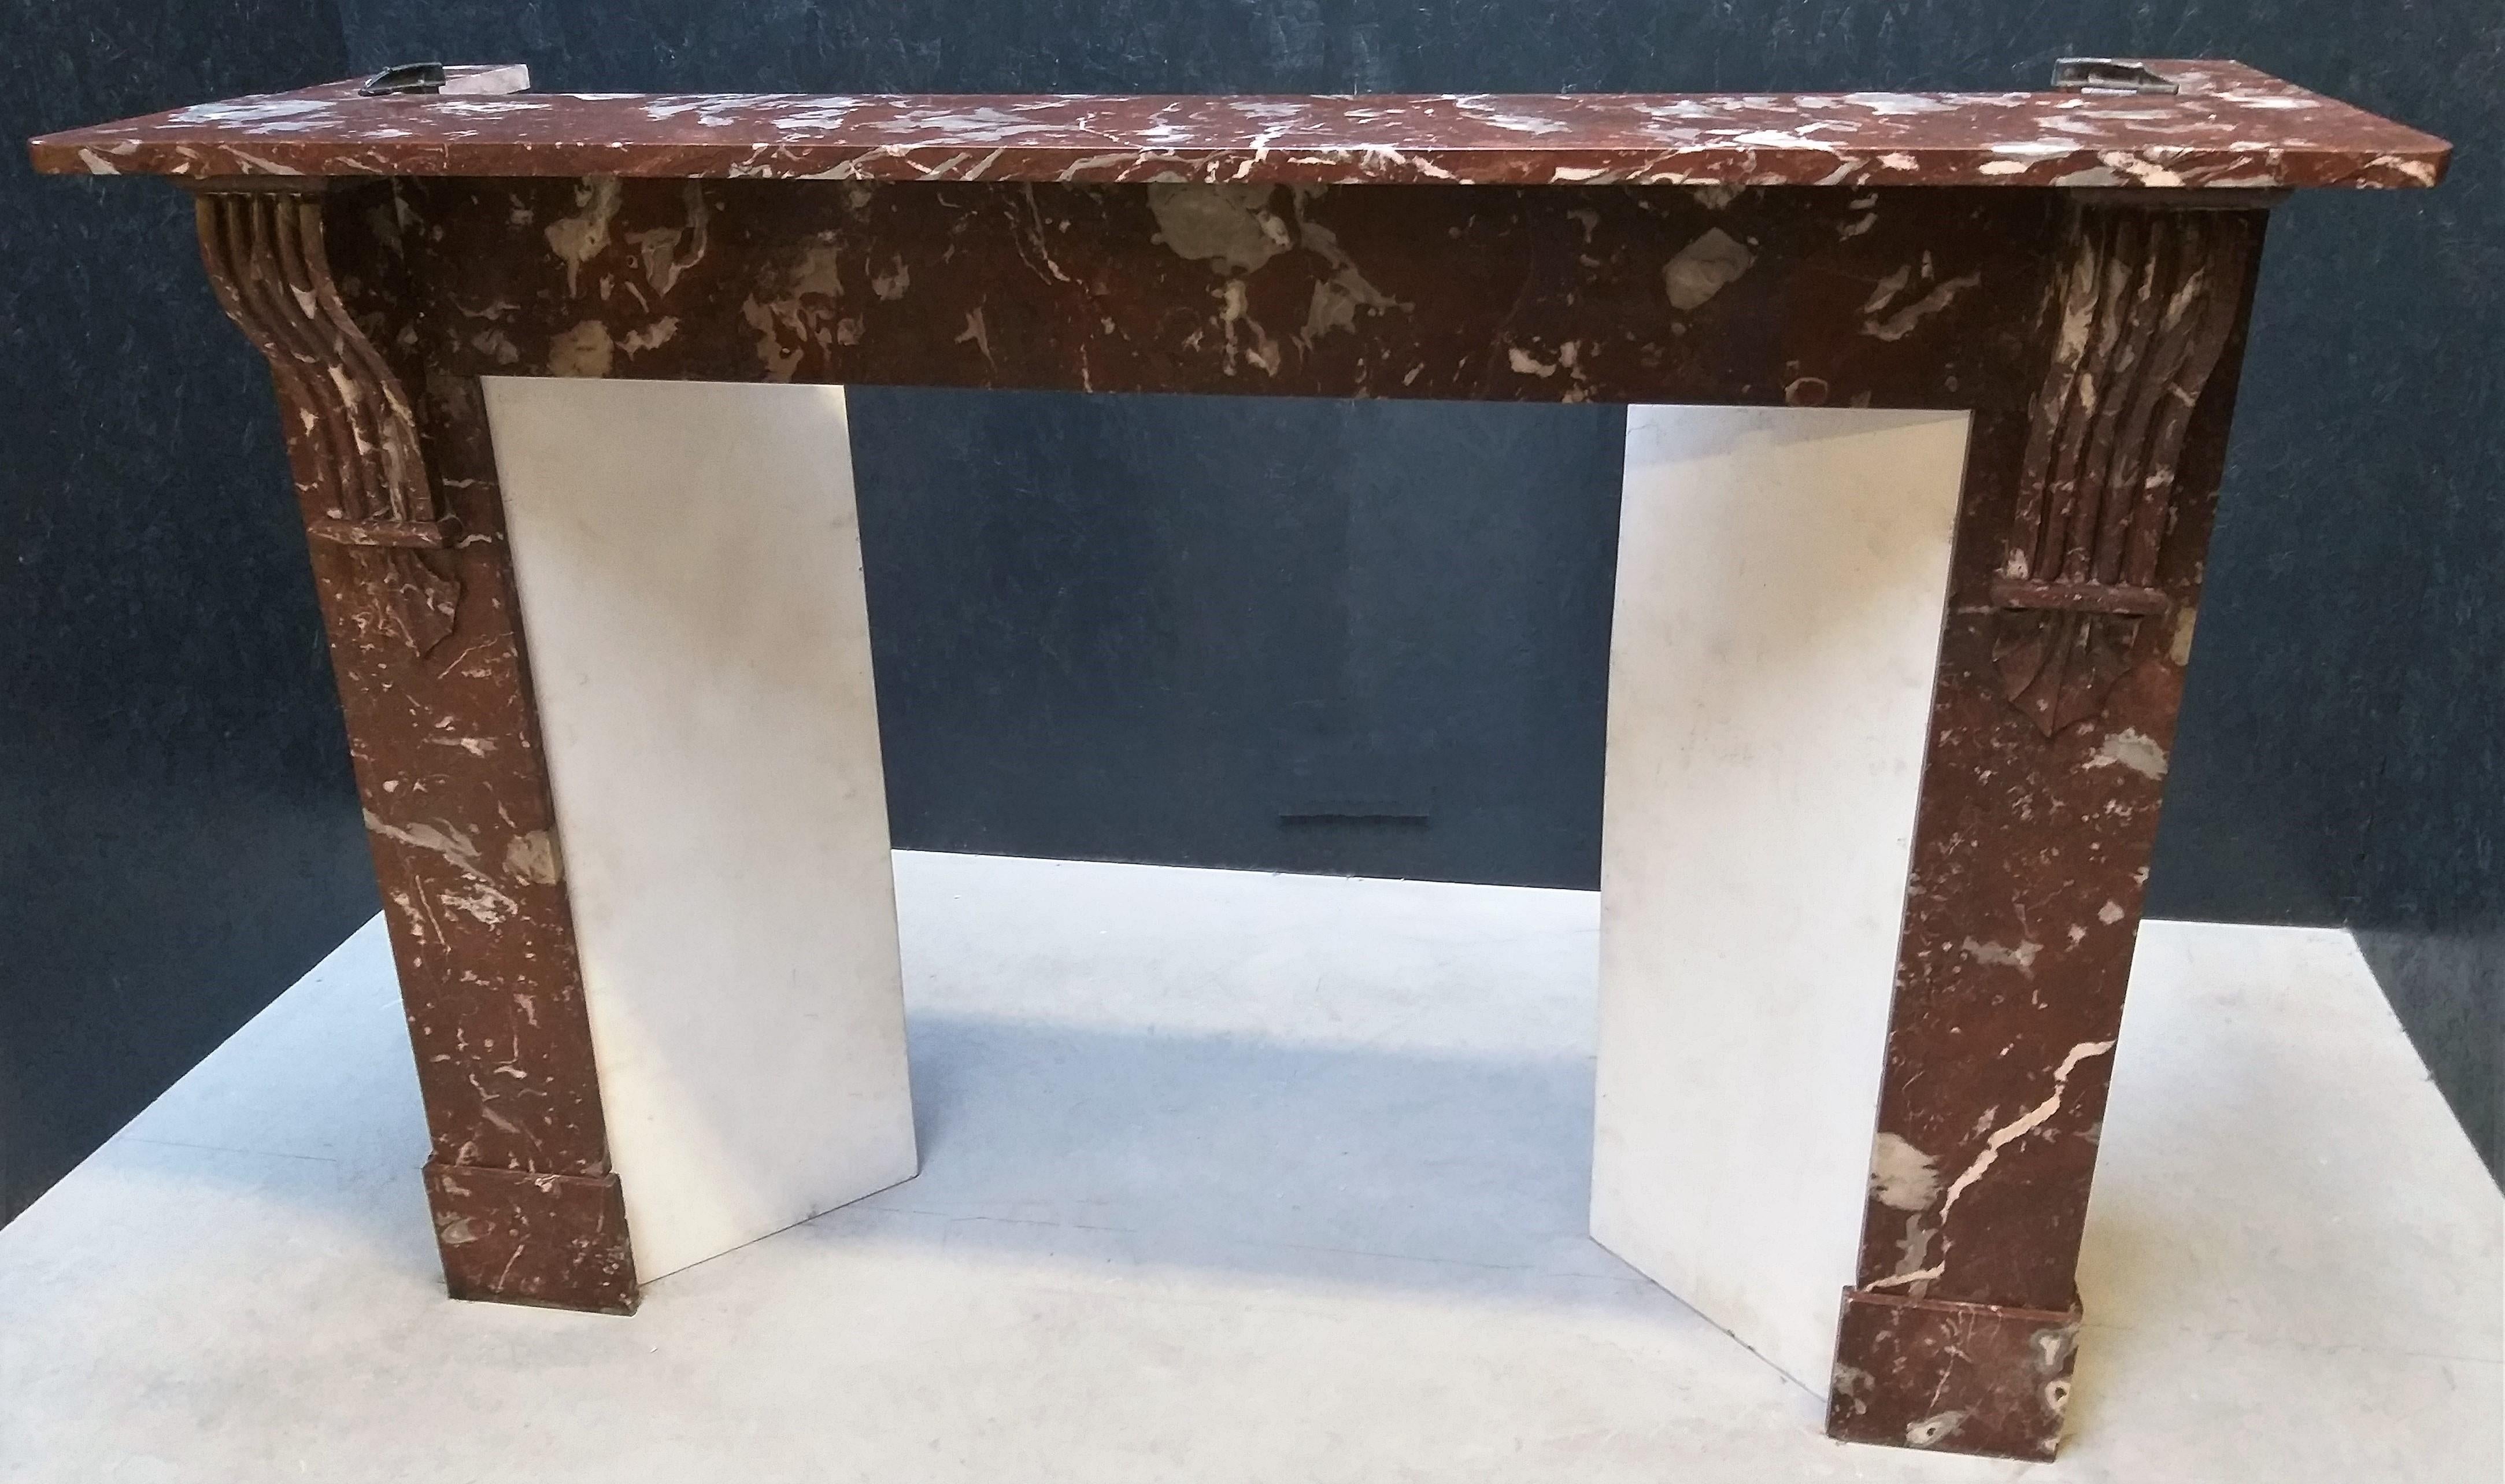 This fireplace with sleek lines is from the period 1870-1910 and is made out of the Belgian marble Rance.
The colors are dark-brown-red- and a vivid movement is given by expressive white veins.
This fireplace has because of her young age maybe not